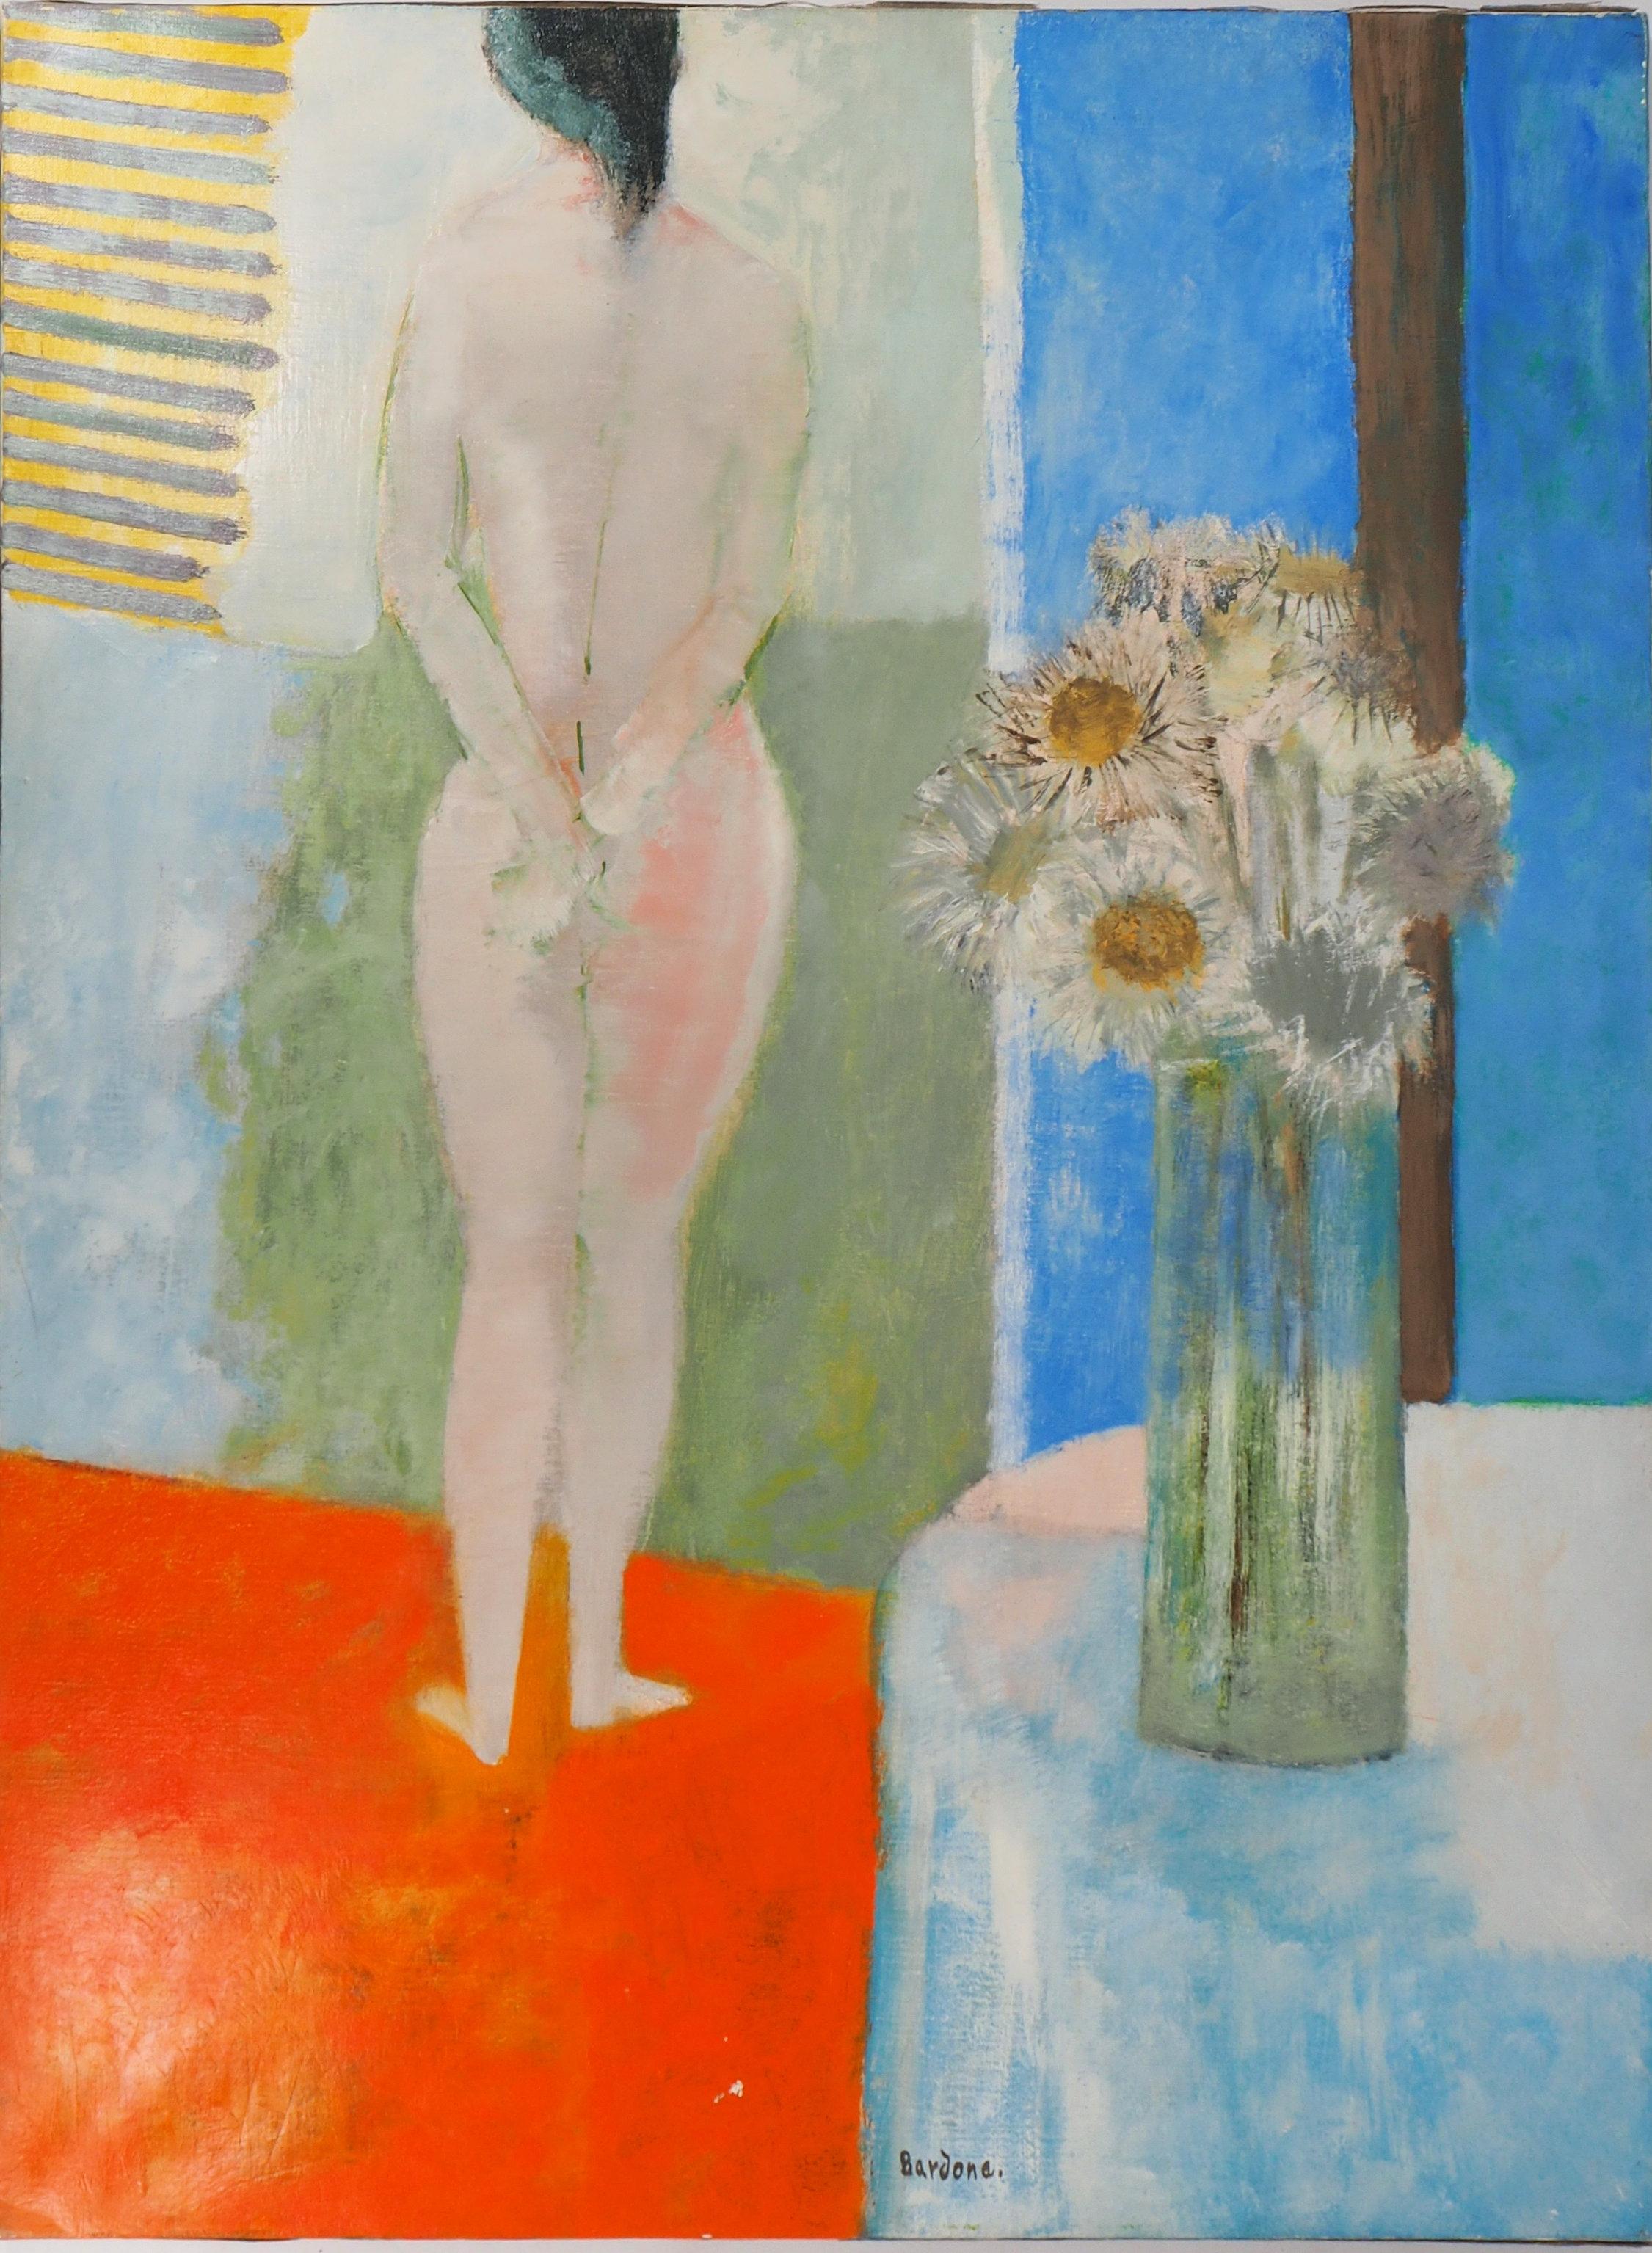 Guy Bardone Nude Painting - Interior : Model with Thistles - Original Oil on Canvas, Handsigned